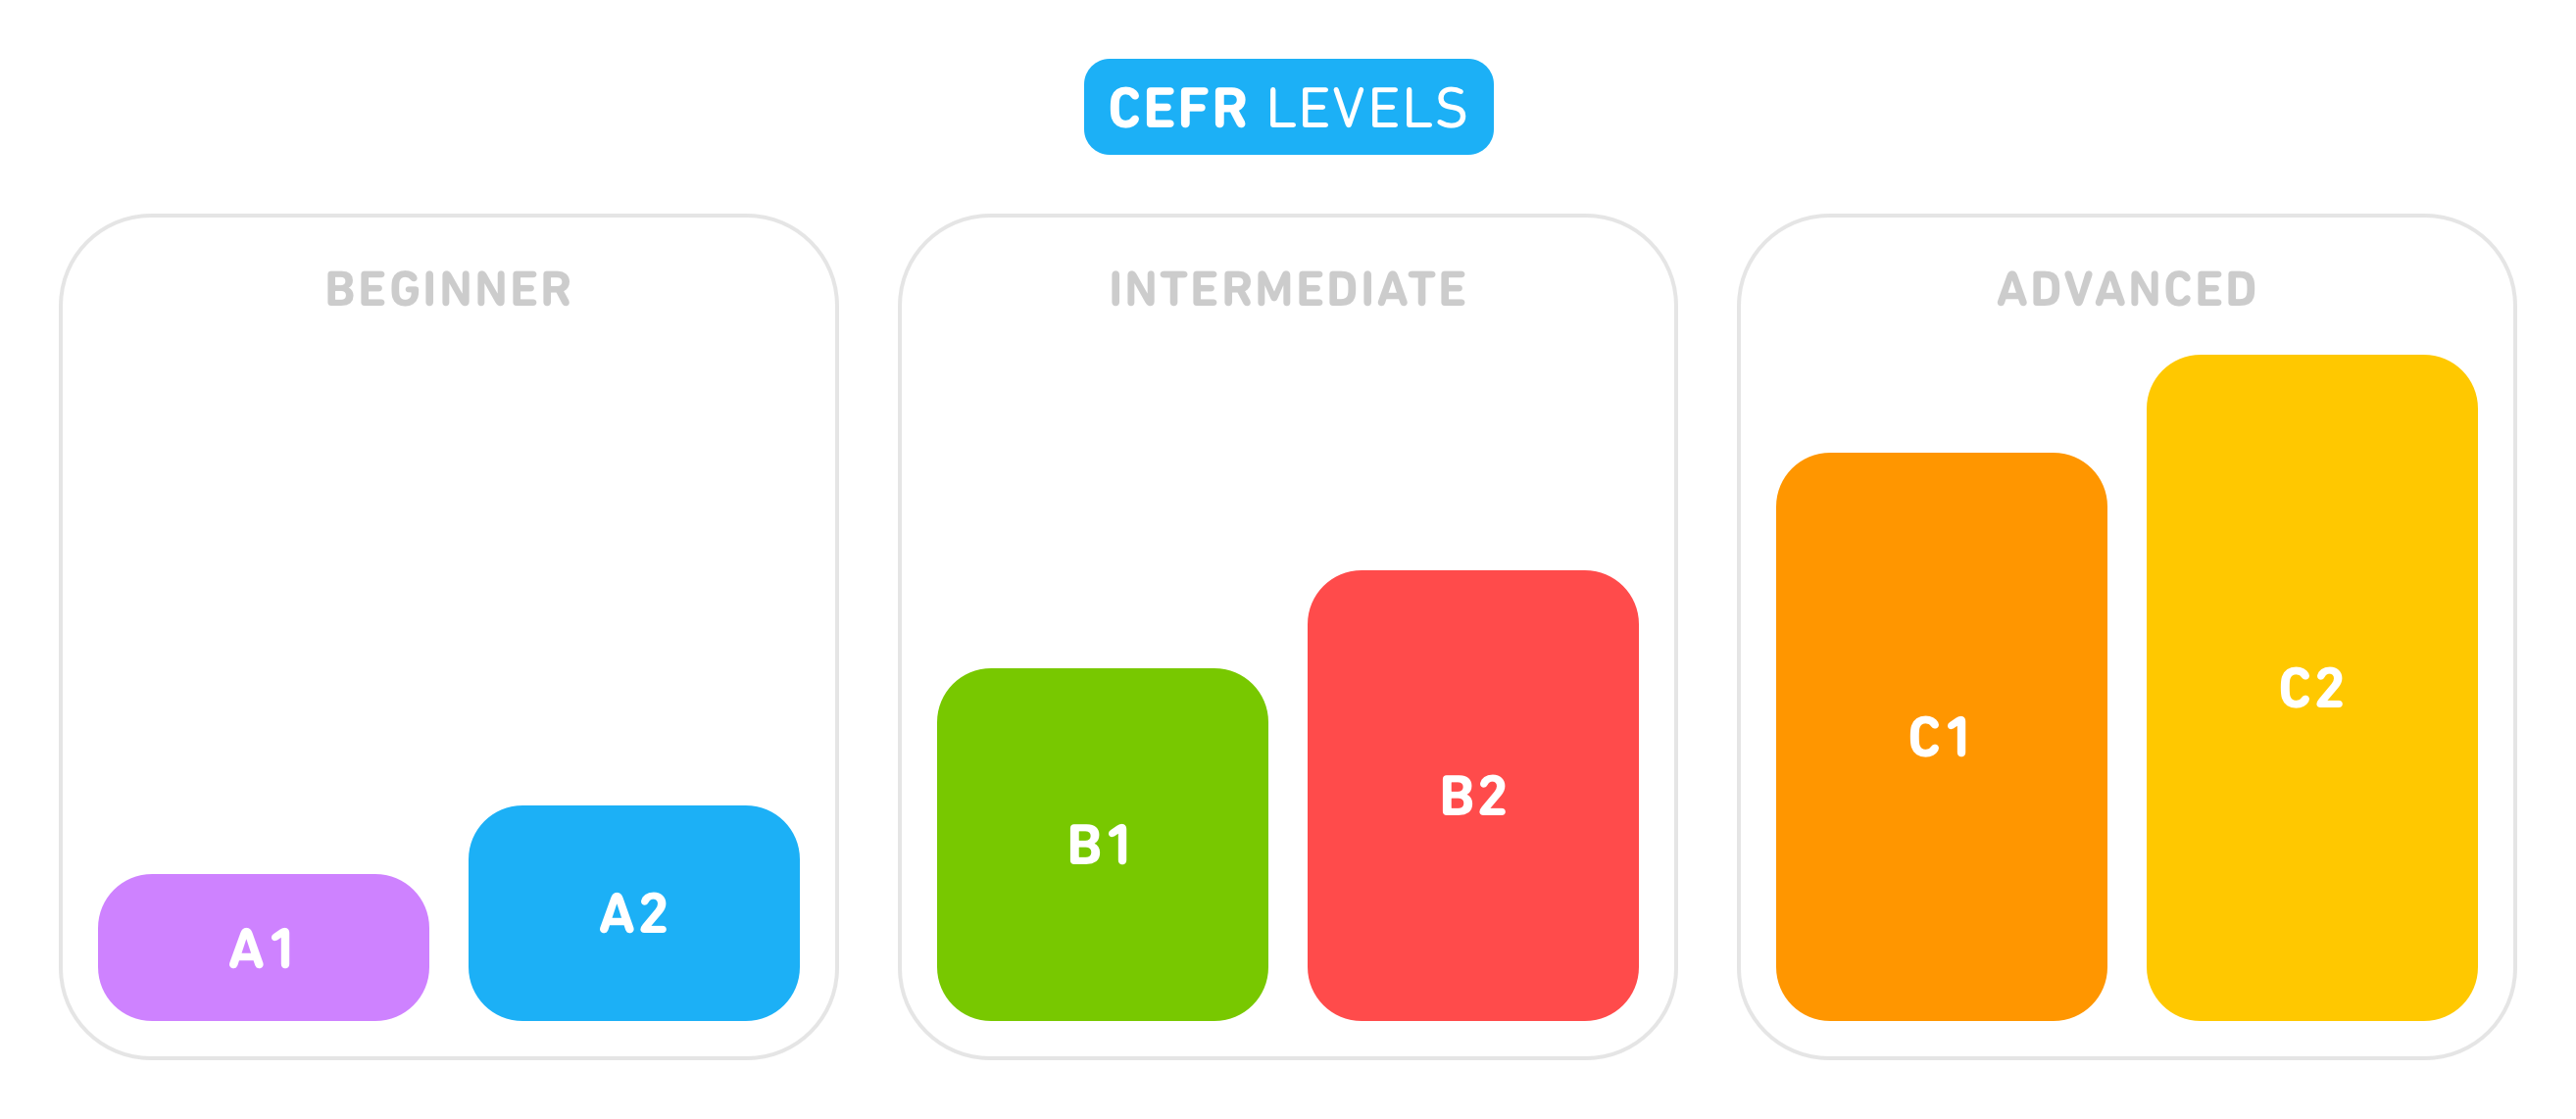 Image labeled "CEFR levels." There are six bars side-by-side horizontally, sort of like a bar chart. Each of the six bars is a different color and they gradually get taller: the left-most bar is the shortest and the right-most bar is the tallest. The bars are paired together and each pair has a light gray box and label around them. The first pair of bars, on the left, are labeled "Beginner", and the first bar is labeled A1 and the next bar, a bit taller, is A2. The second pair of bars, in the middle, are labeled "Intermediate" and are labeled B1 and B2. The third pair of bars, on the right, are labeled "Advanced" and the bars are C1 and C2.